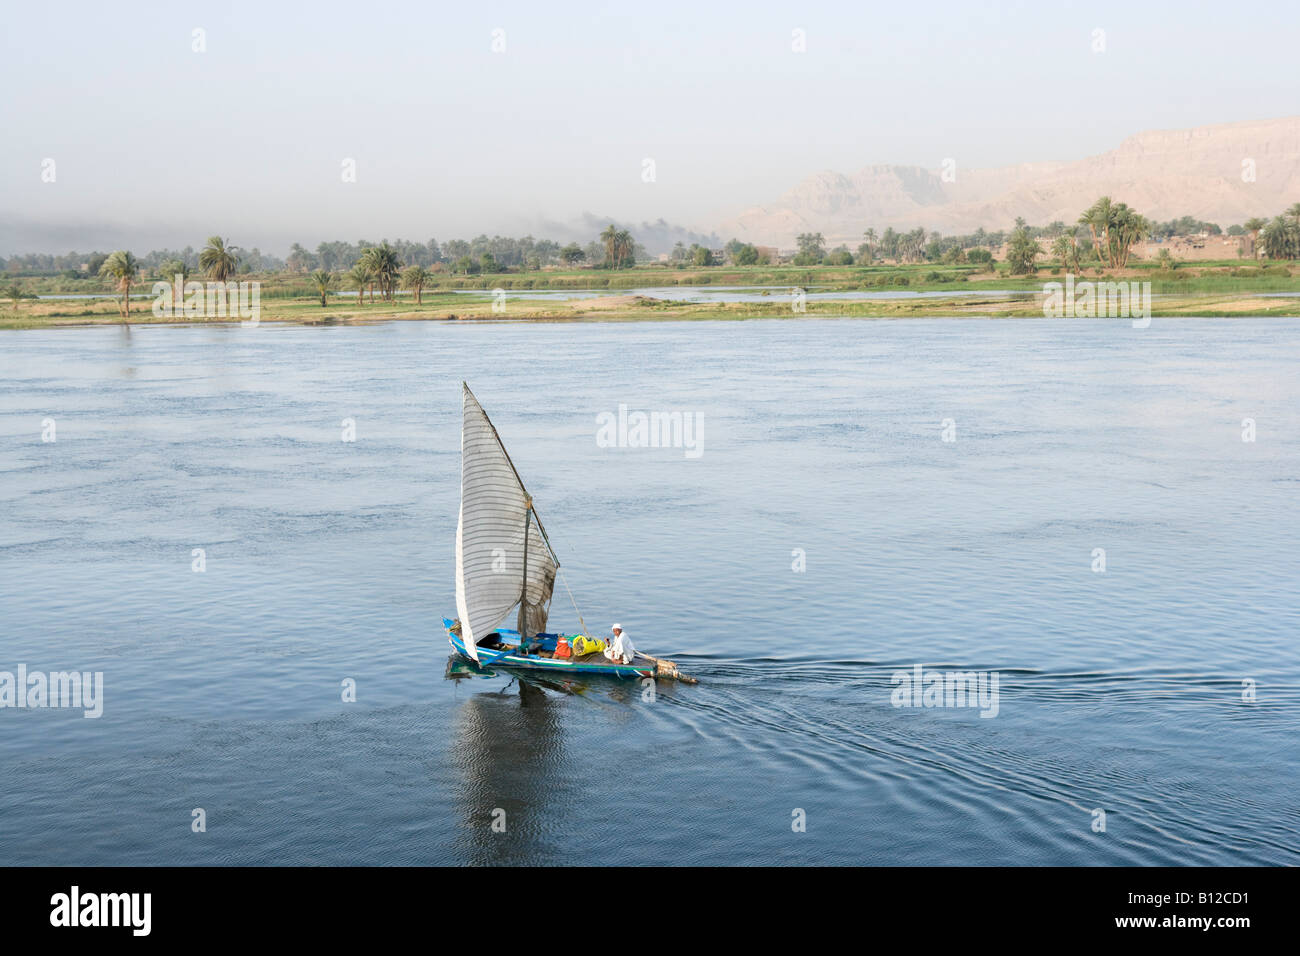 Traditional Felucca on the River Nile near Quena downstream from Luxor, Nile Valley, Egypt Stock Photo